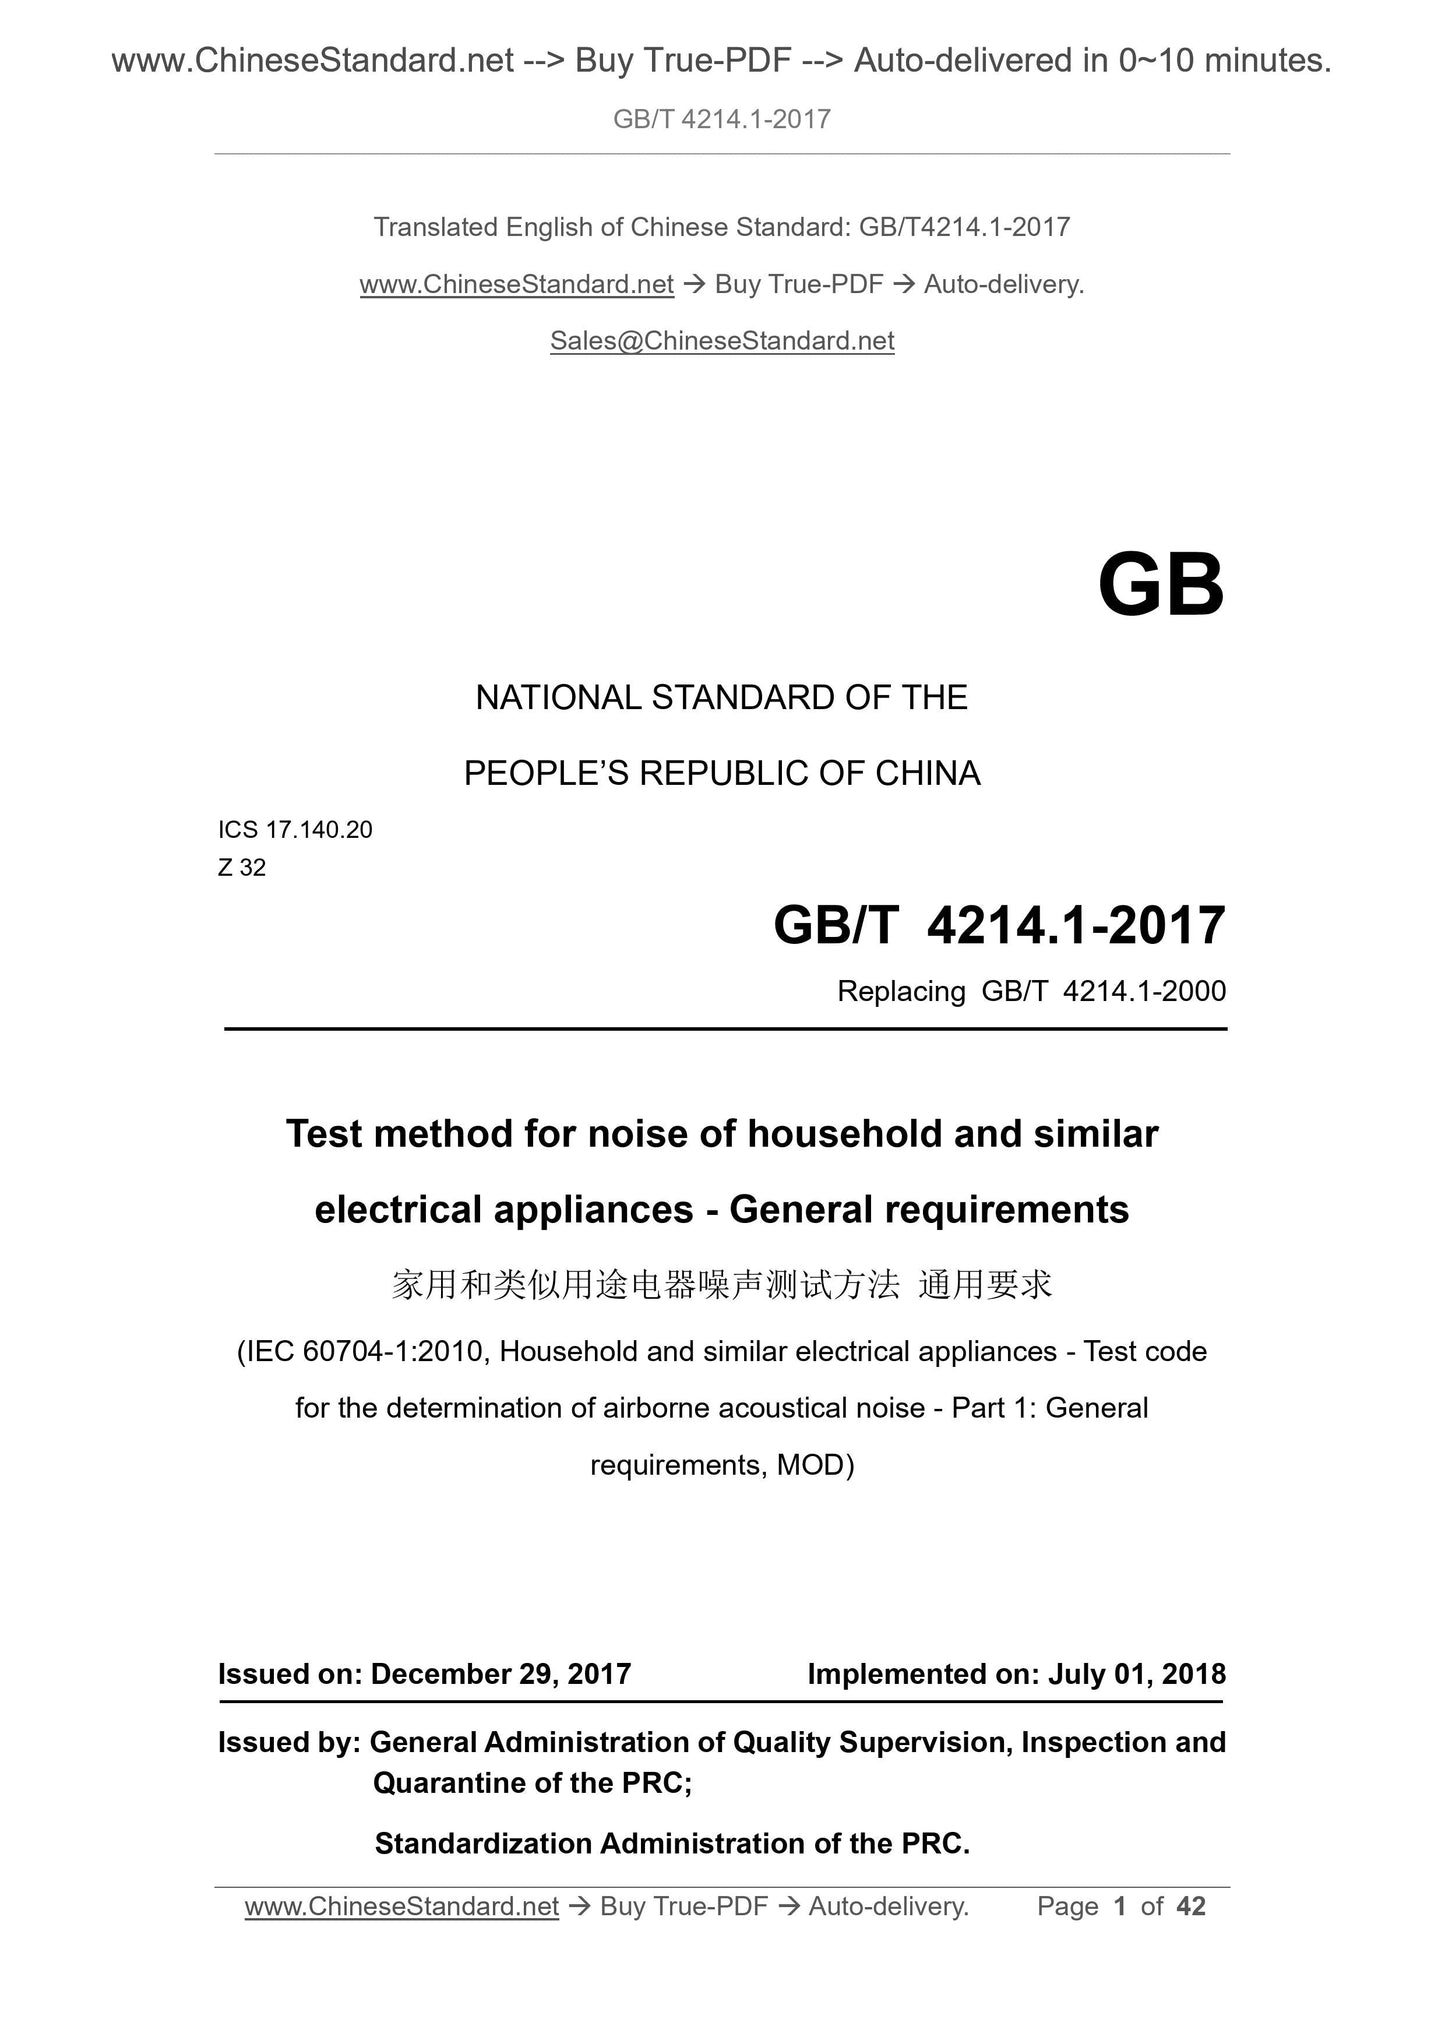 GB/T 4214.1-2017 Page 1